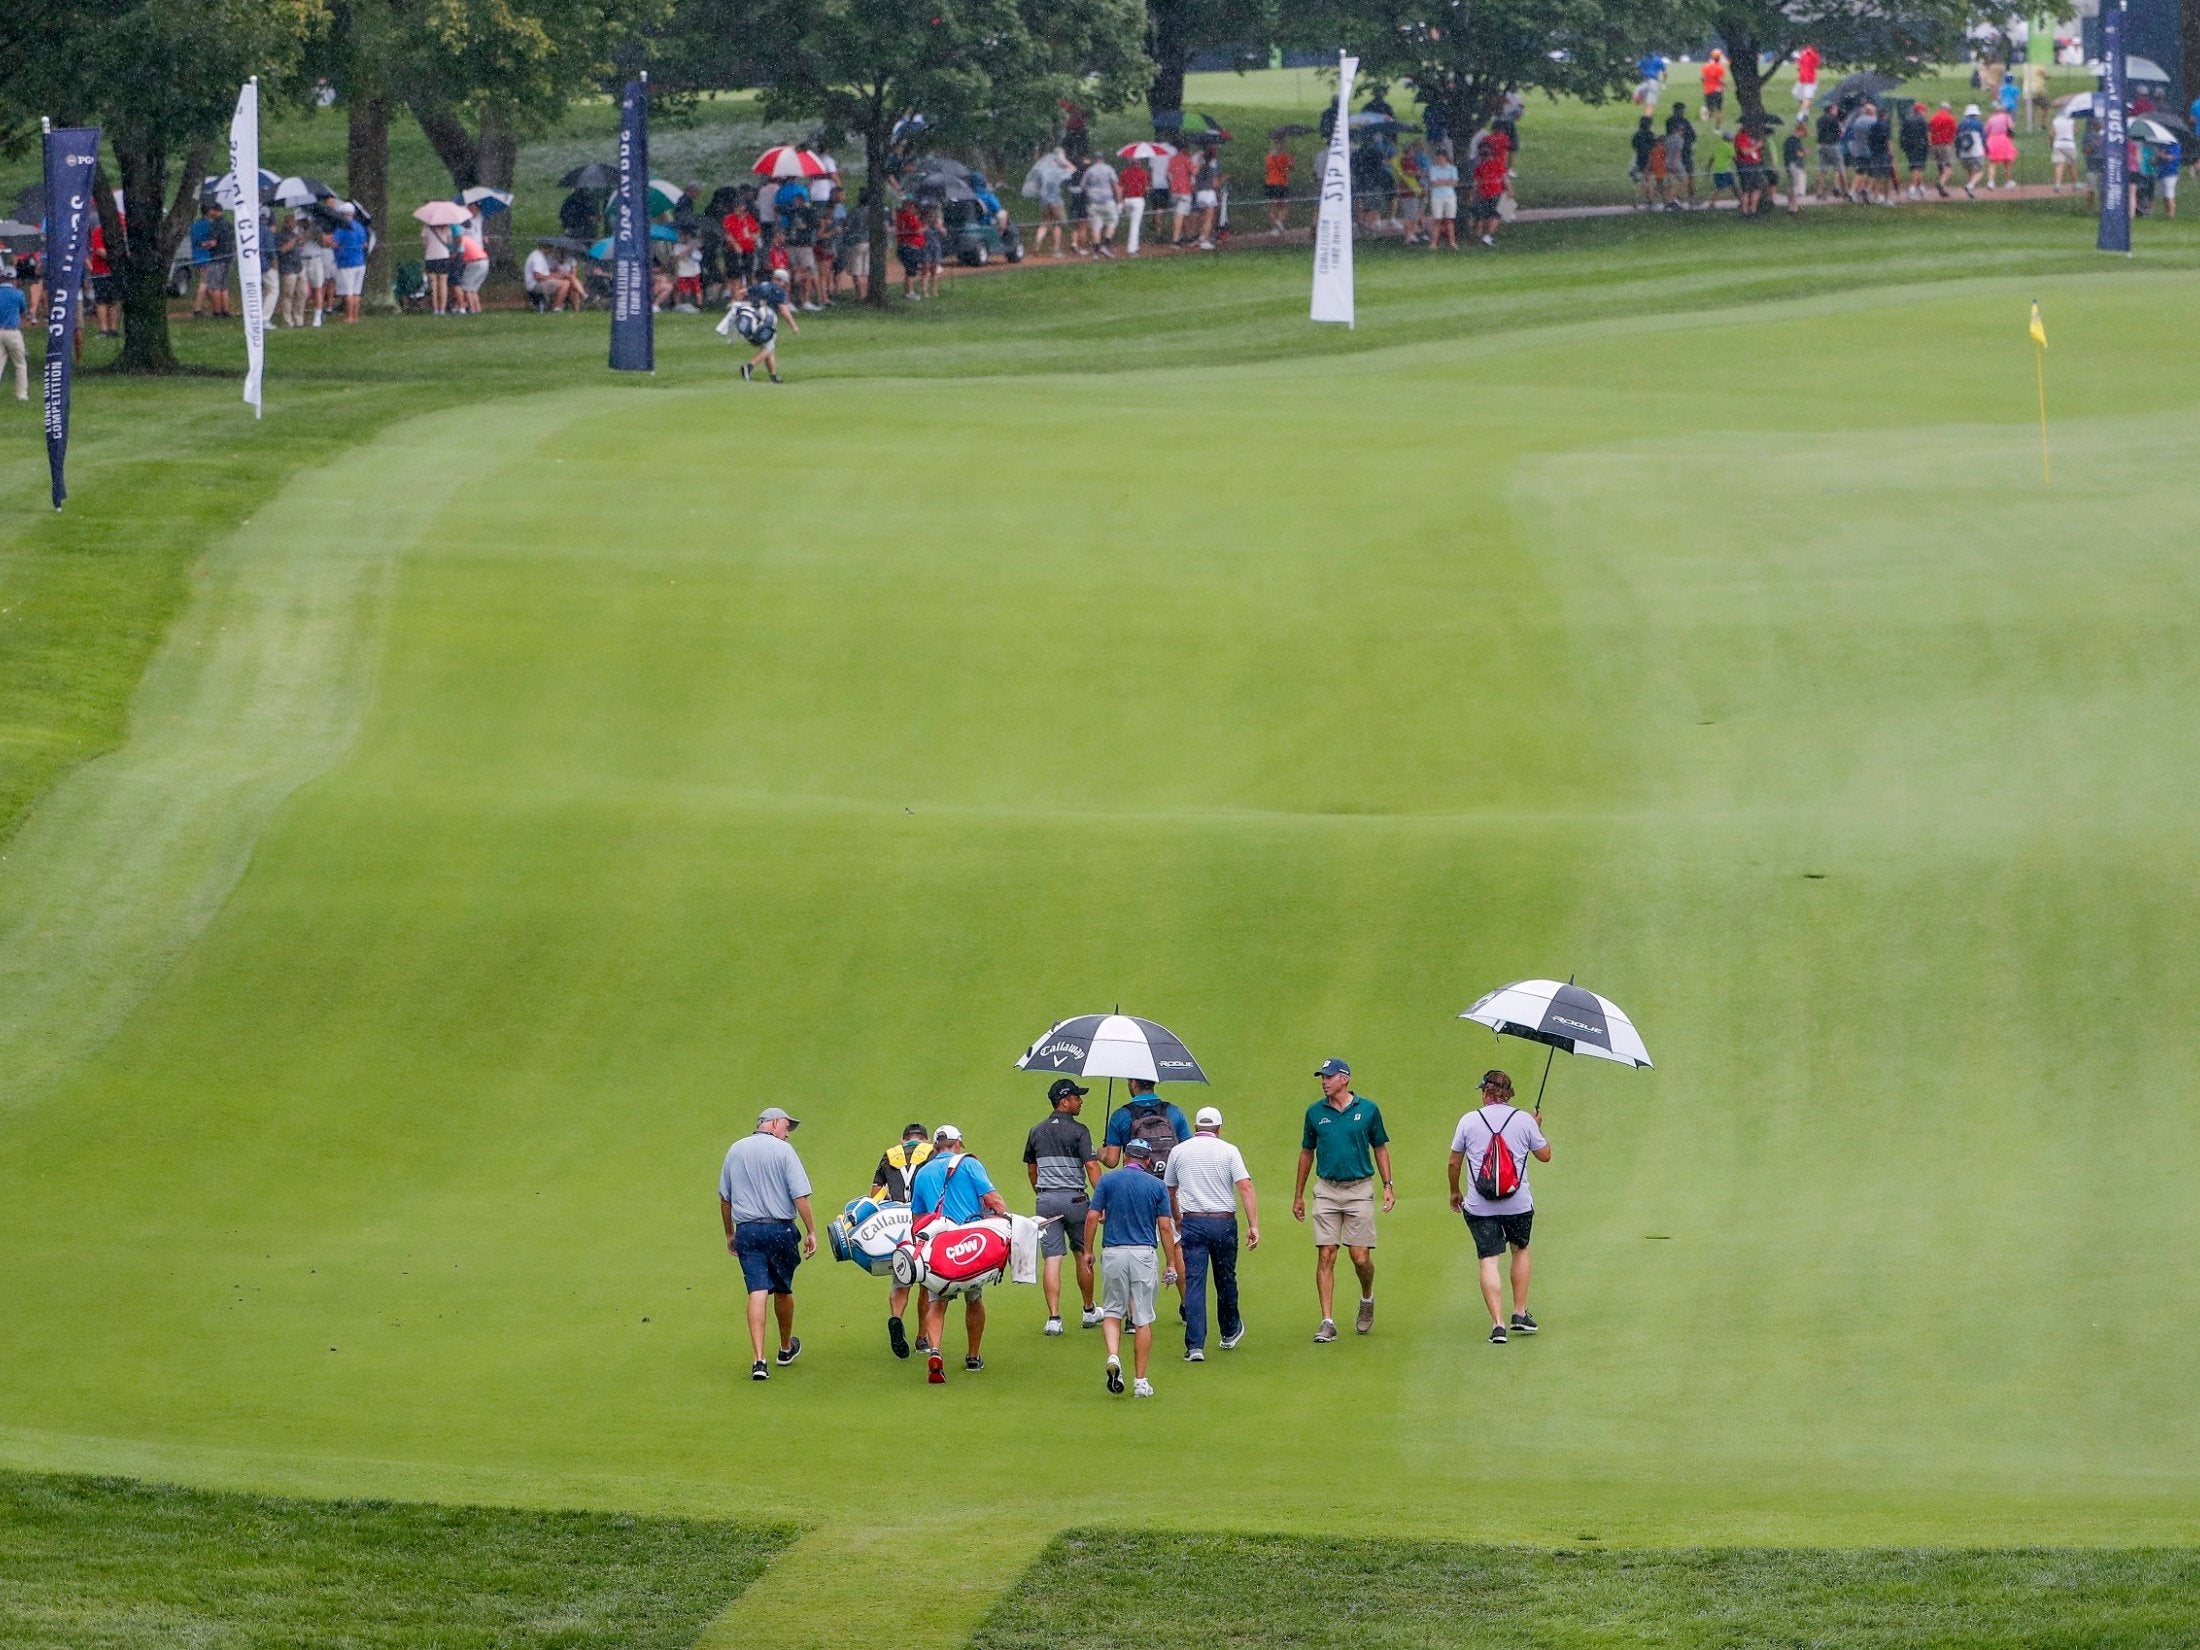 The Bellerive Country Club in St. Louis, Missouri hosts the 100th PGA Championship